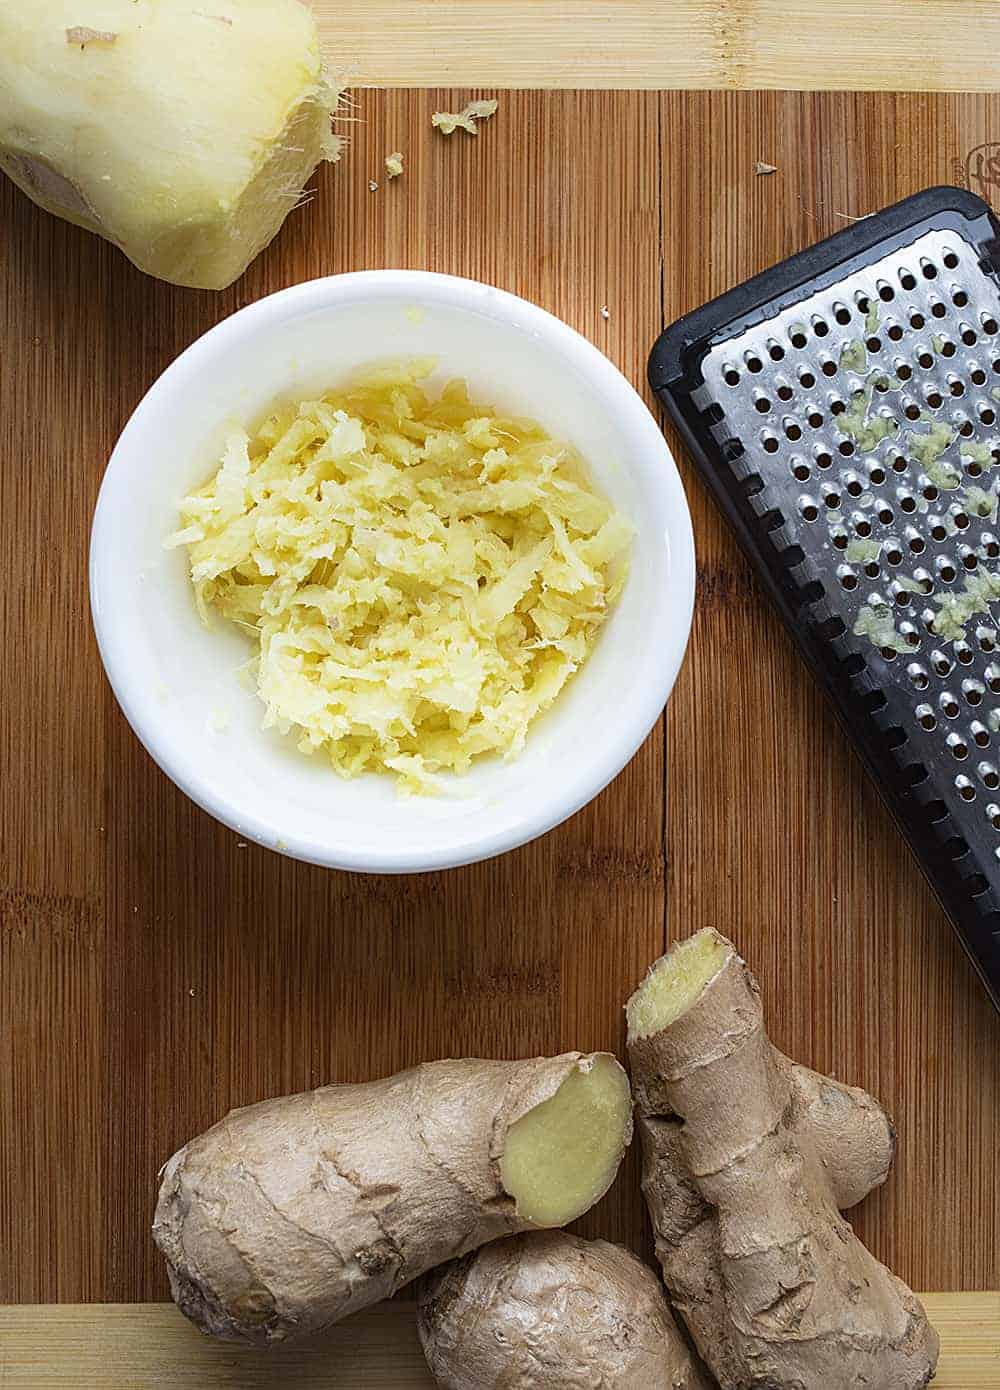 Raw Ginger for Homemade Giner Ale